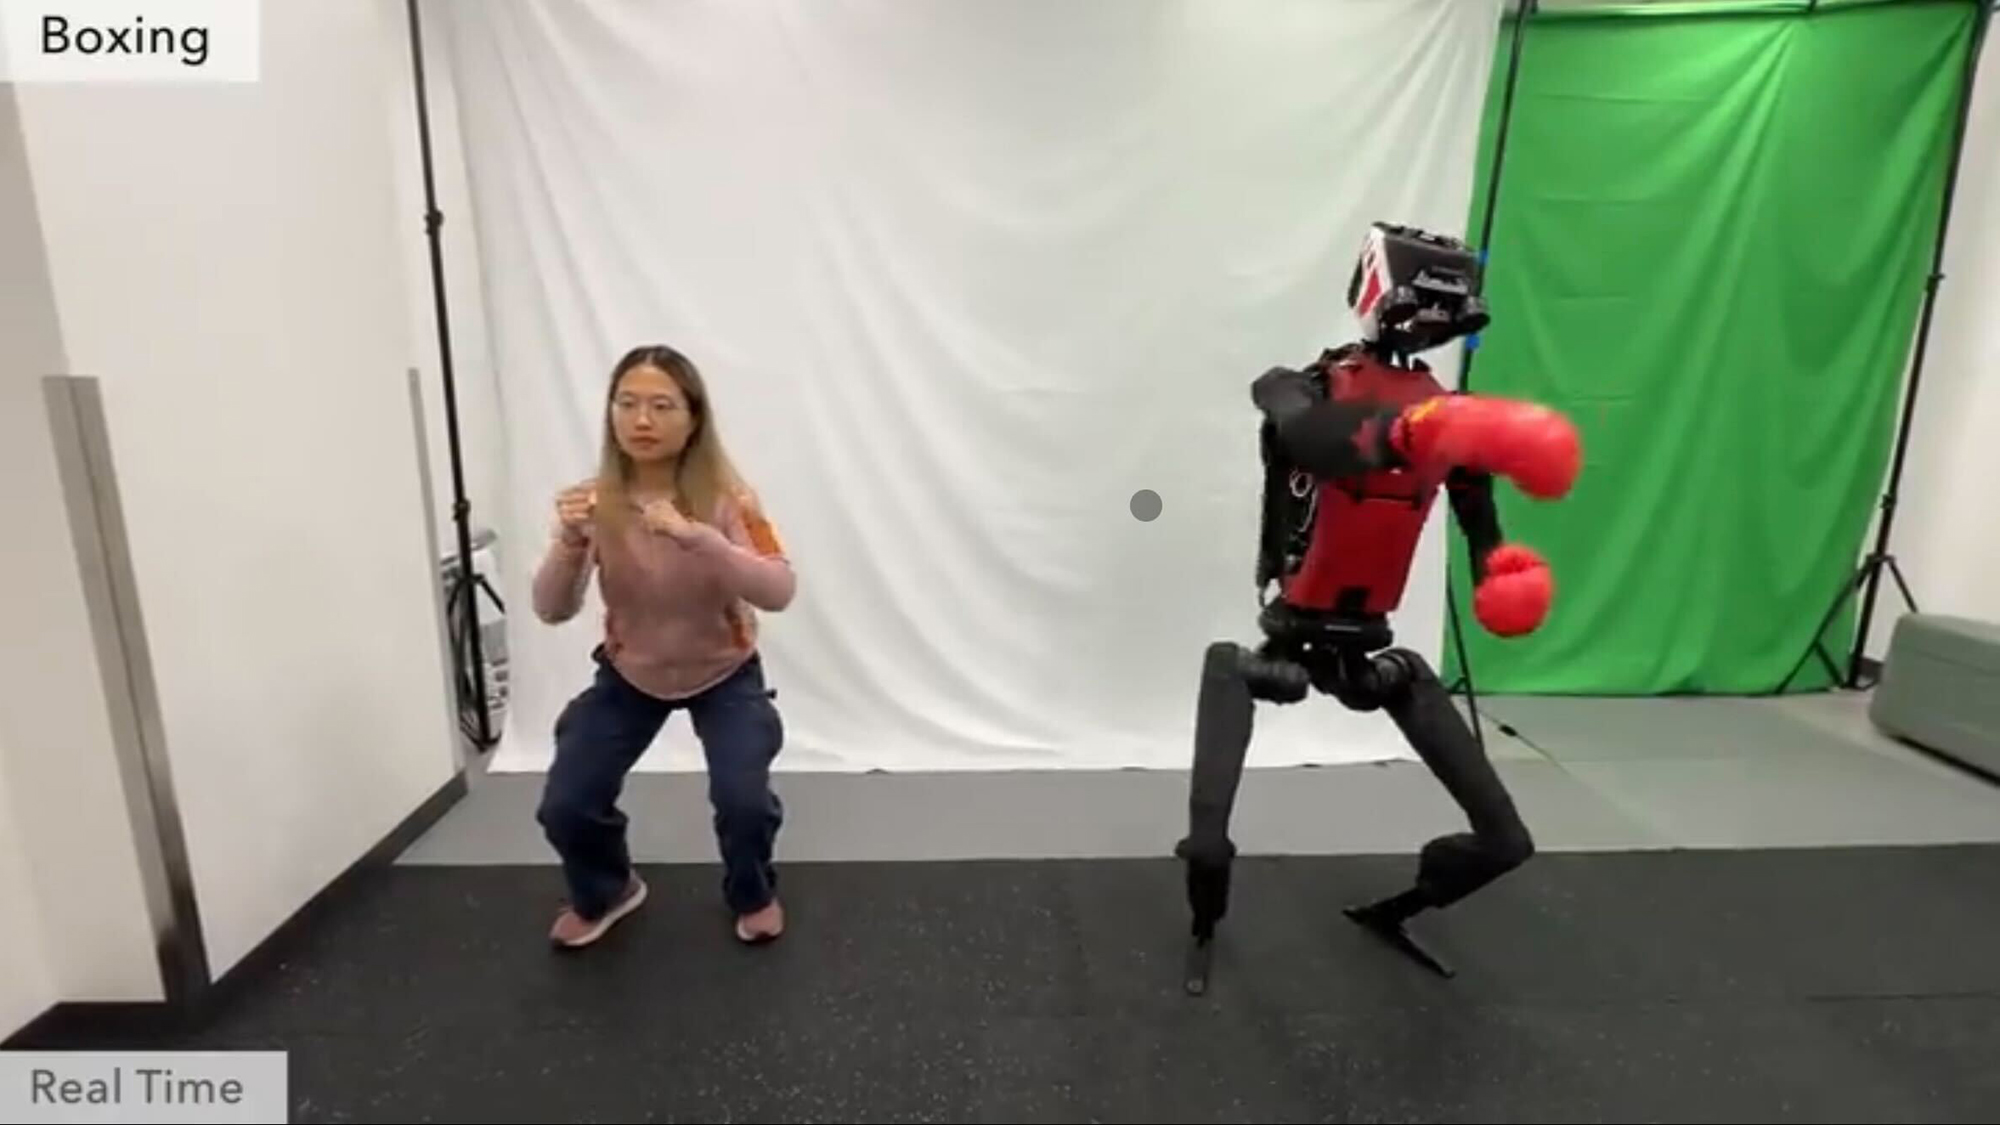 These robots learned to play tennis and boxing after observing humans